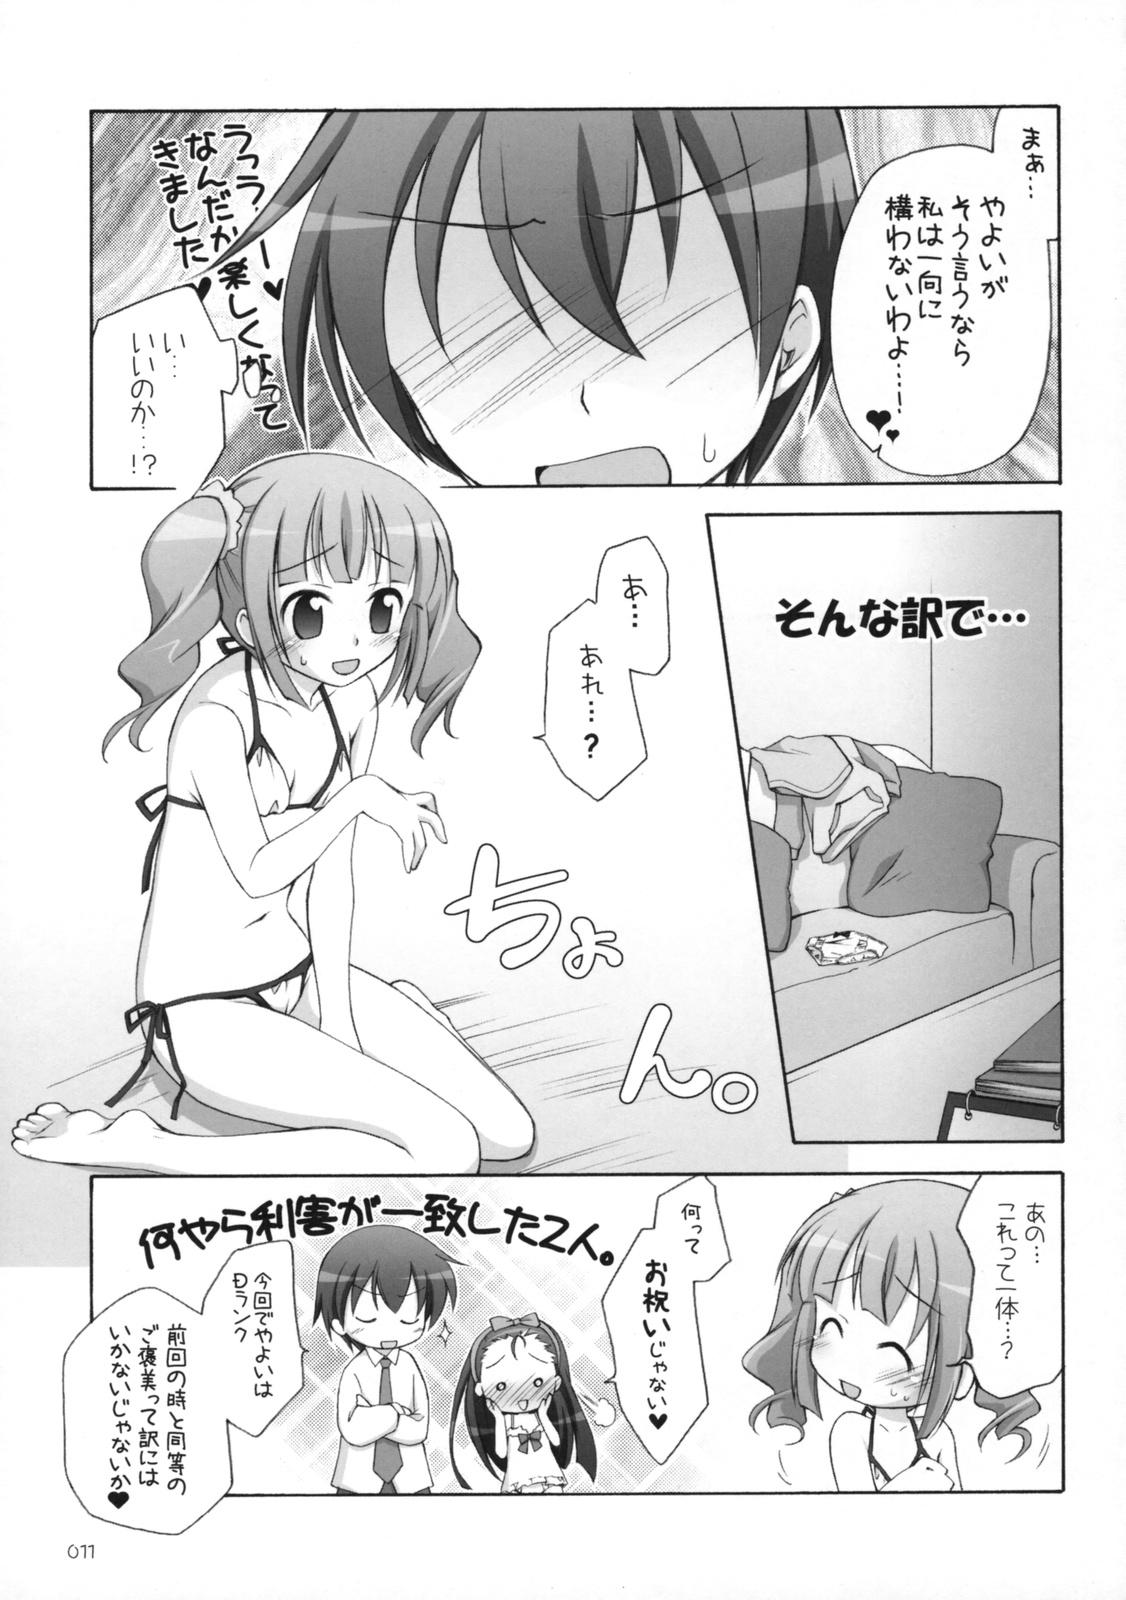 Fat Suitei iDOL 2 - The idolmaster Fitness - Page 10